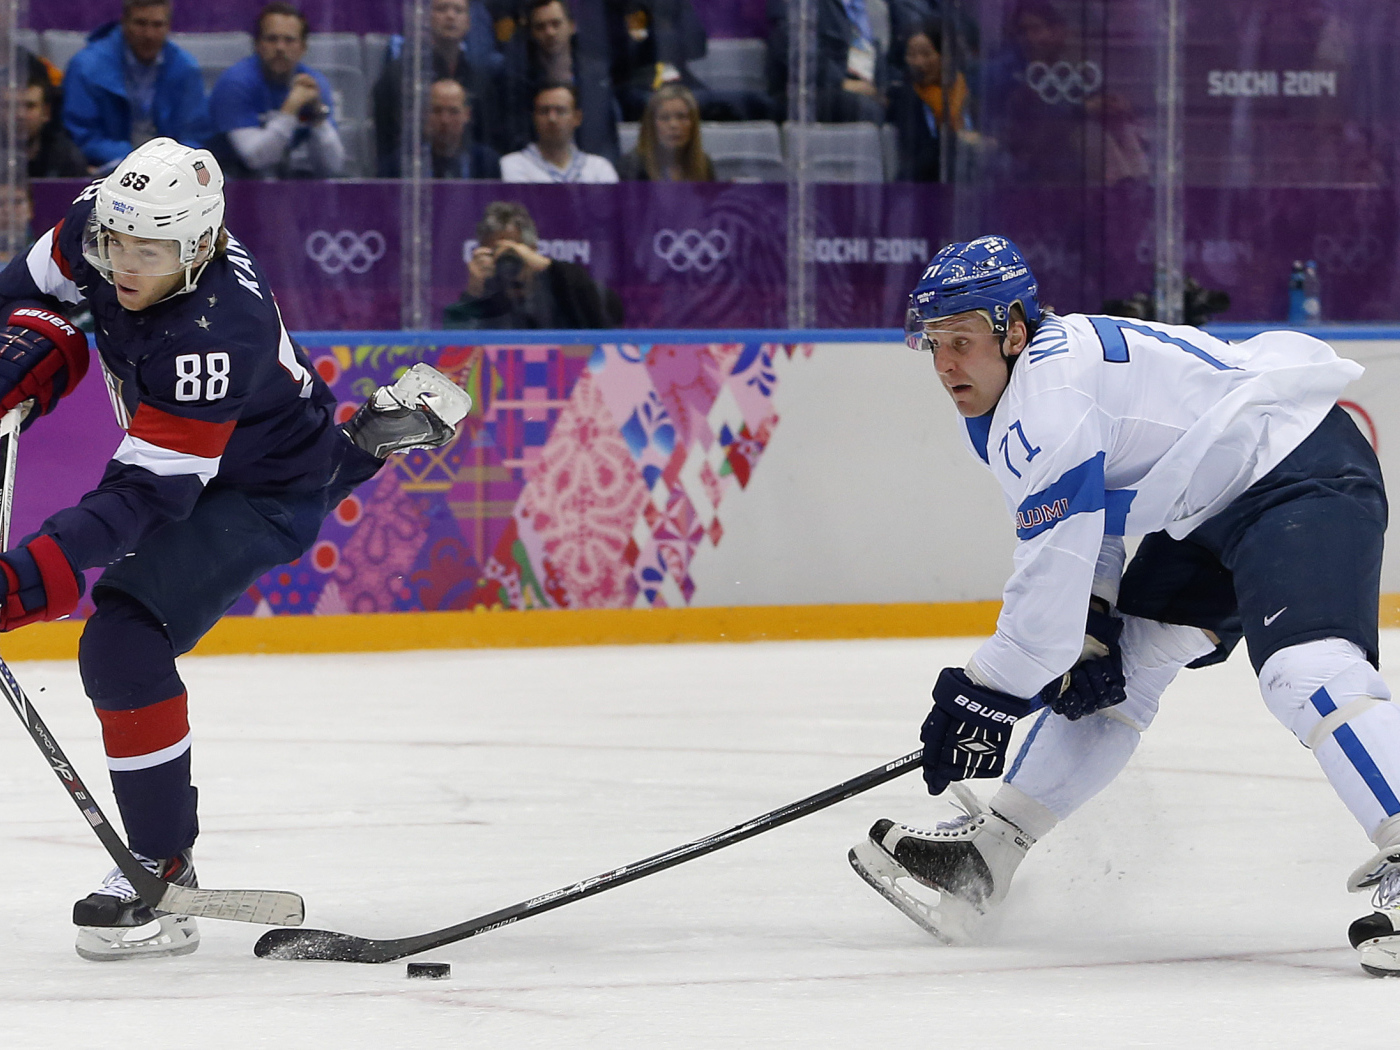 Finnish hockey bronze medal at the Olympic Games in Sochi